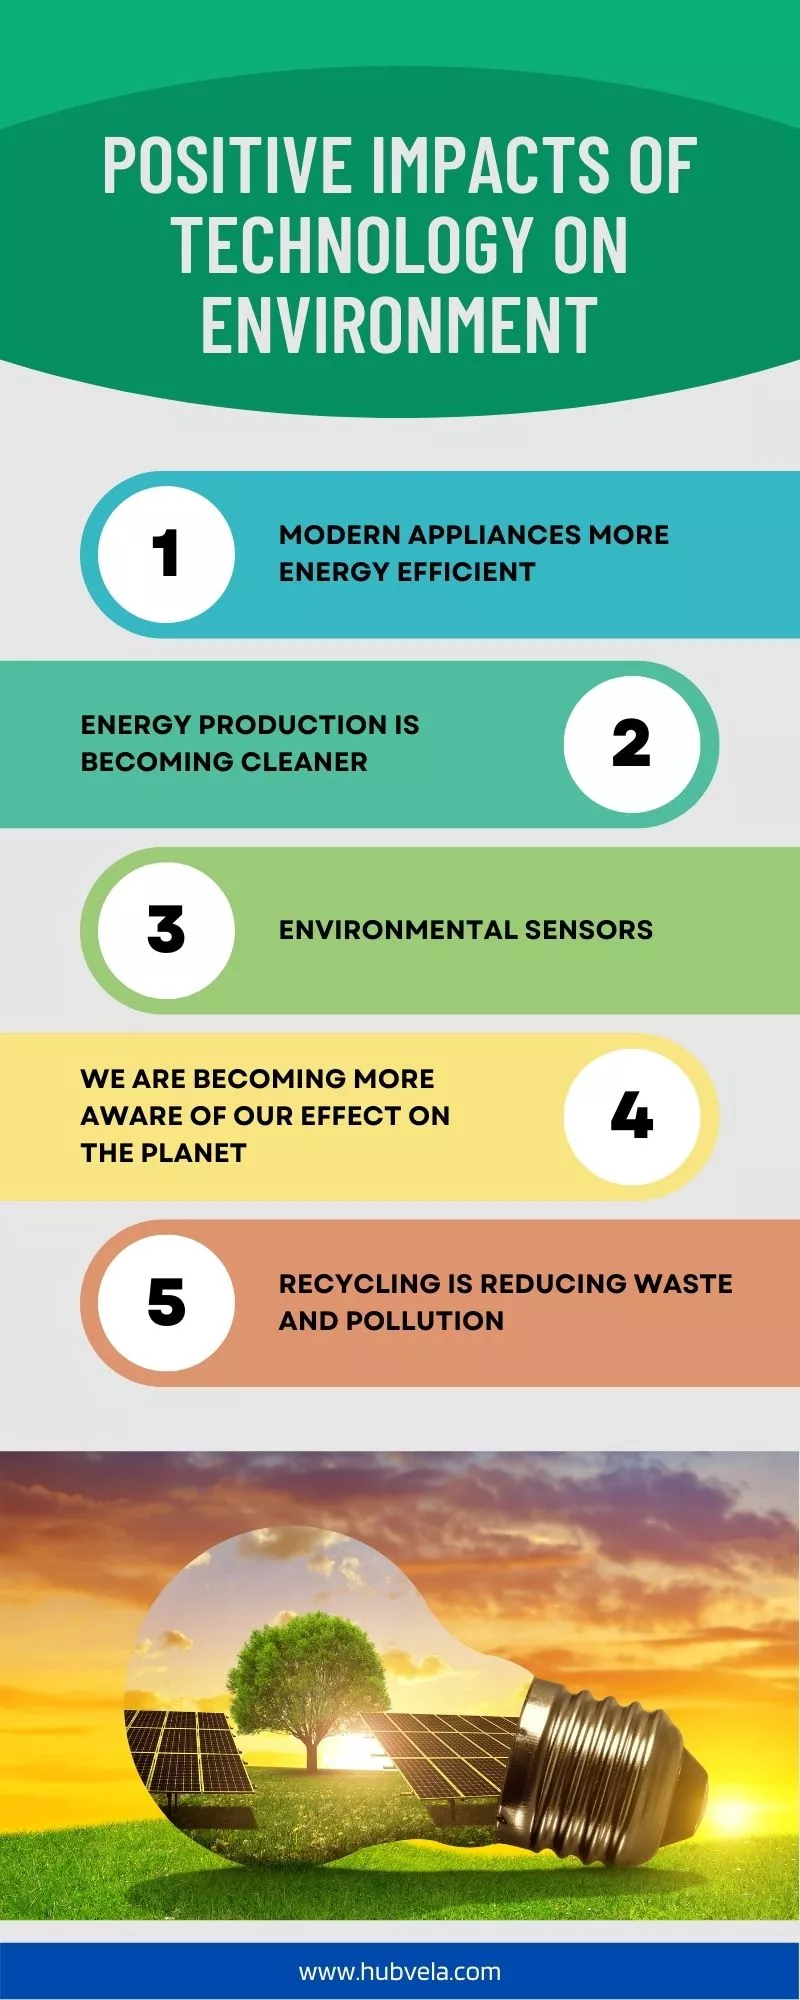 Positive Impacts of Technology on Environment infographic